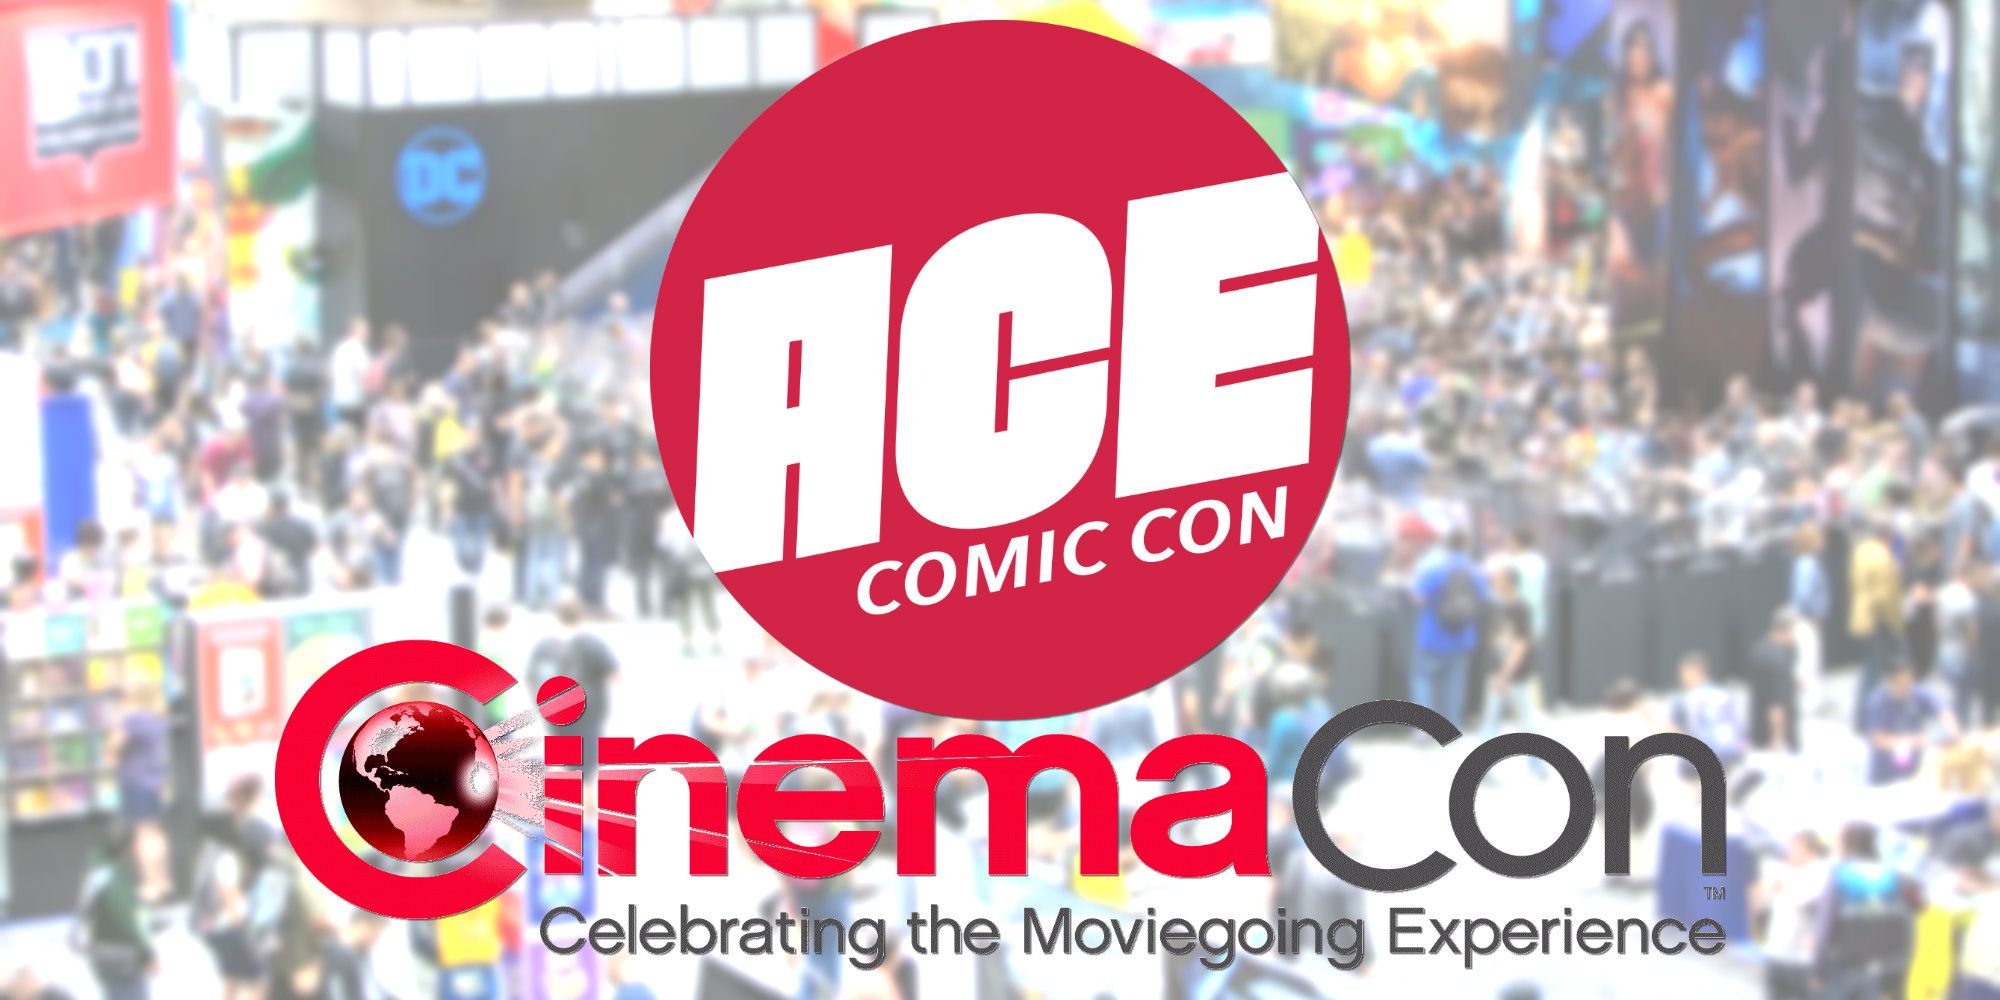 ACE Comic Con and CinemaCon canceled